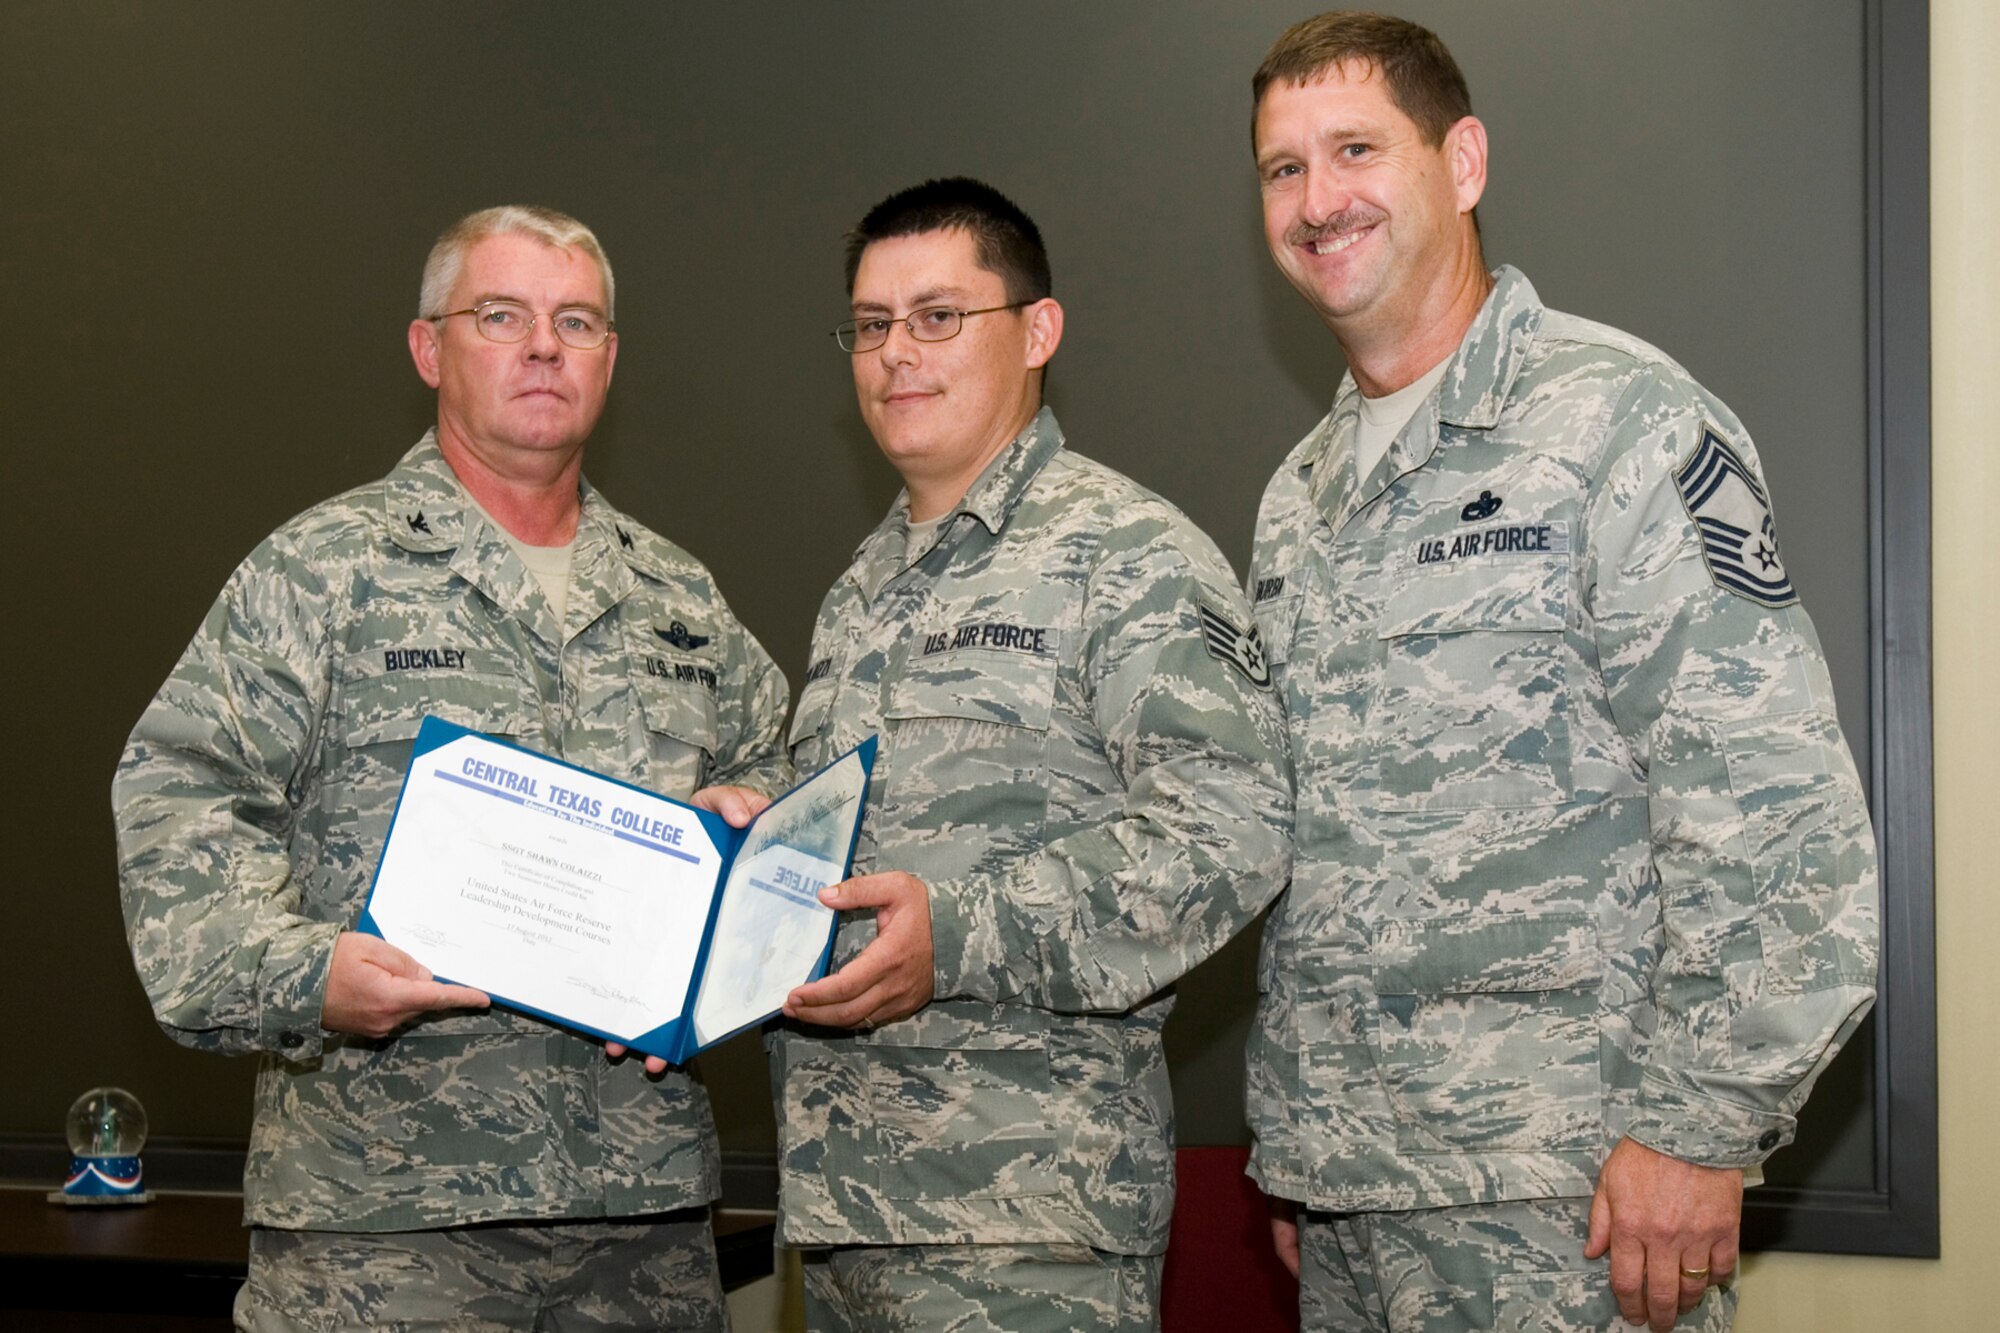 GRISSOM AIR RESERVE BASE, Ind. -- Staff Sgt. Shawn Colaizzi, 434th Civil Engineer Squadron pavement and construction apprentice, receives a certificate of training from Col. Don Buckley, 434th Air Refueling Wing commander, and Chief Master Sergeant James Burba, 434th Maintenance Operations Flight maintenance superintendent, at a graduation ceremony for a Non-Commissioned Officer  Leadership Development Course here Aug. 17. Colaizzi graduated the course with 20 other NCOs. (U.S. Air Force photo/Senior Airman Andrew McLaughlin)